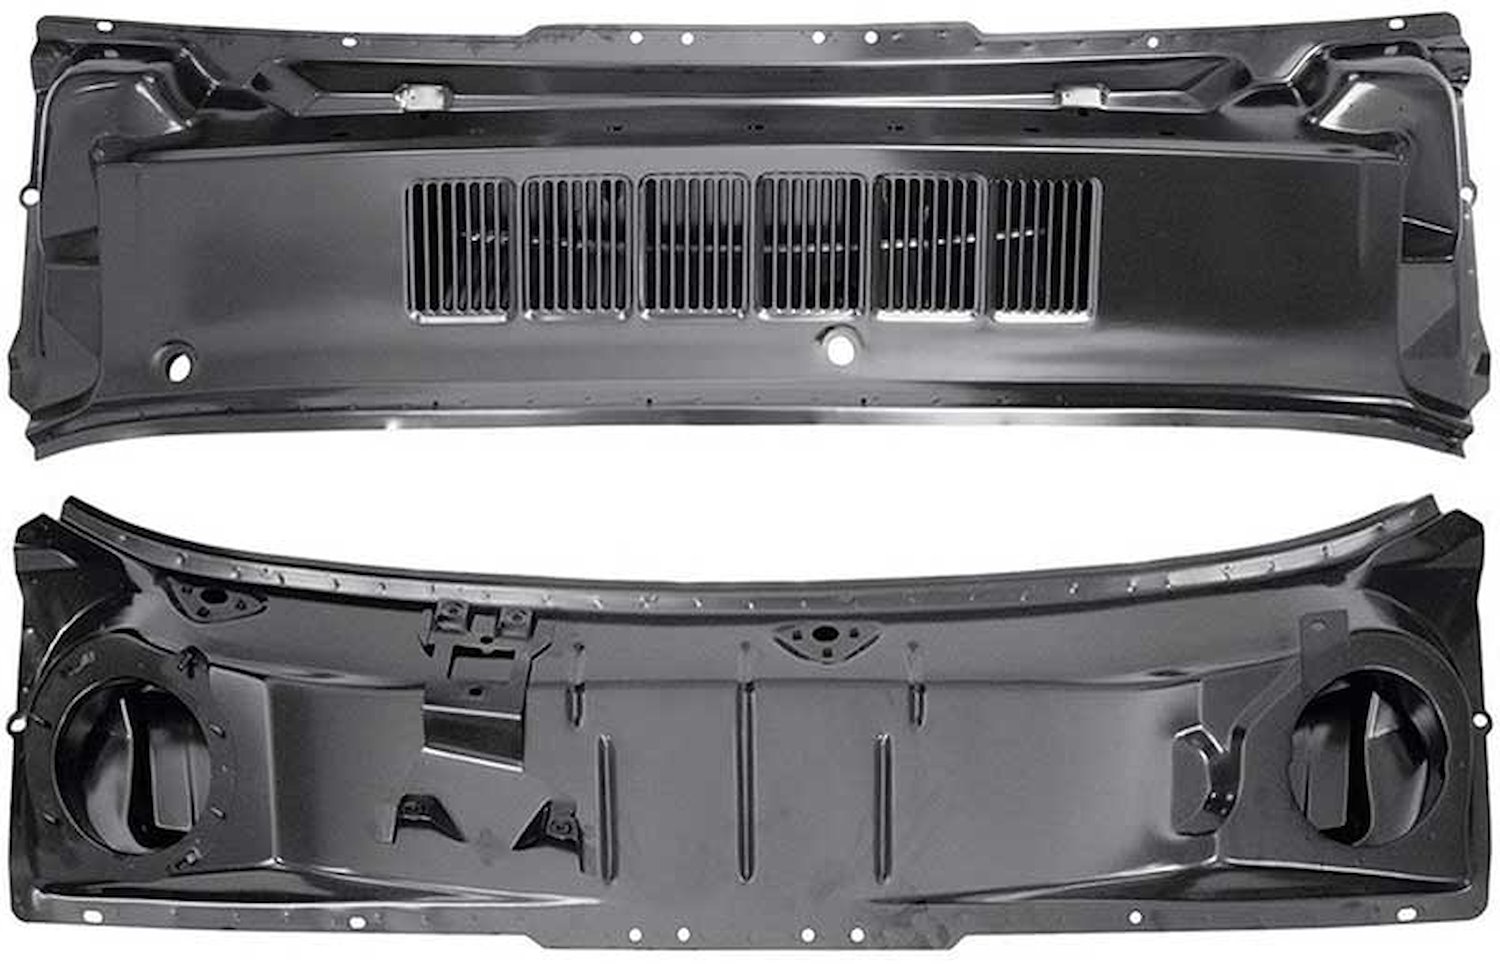 02011A Cowl Grill Panel Assembly 1964-66 Mustang